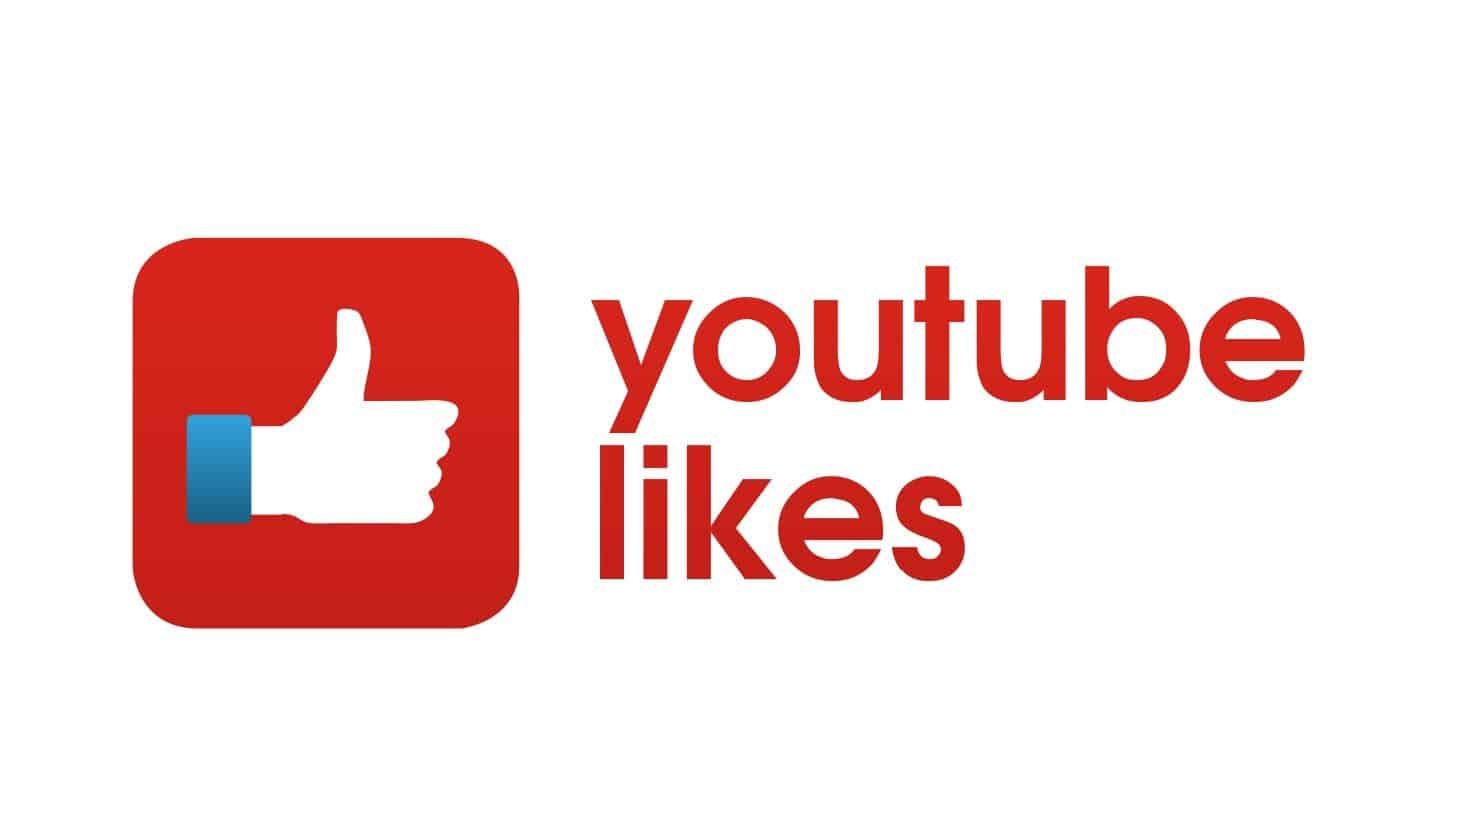 What is the importance of buying likes for your youtube channel?